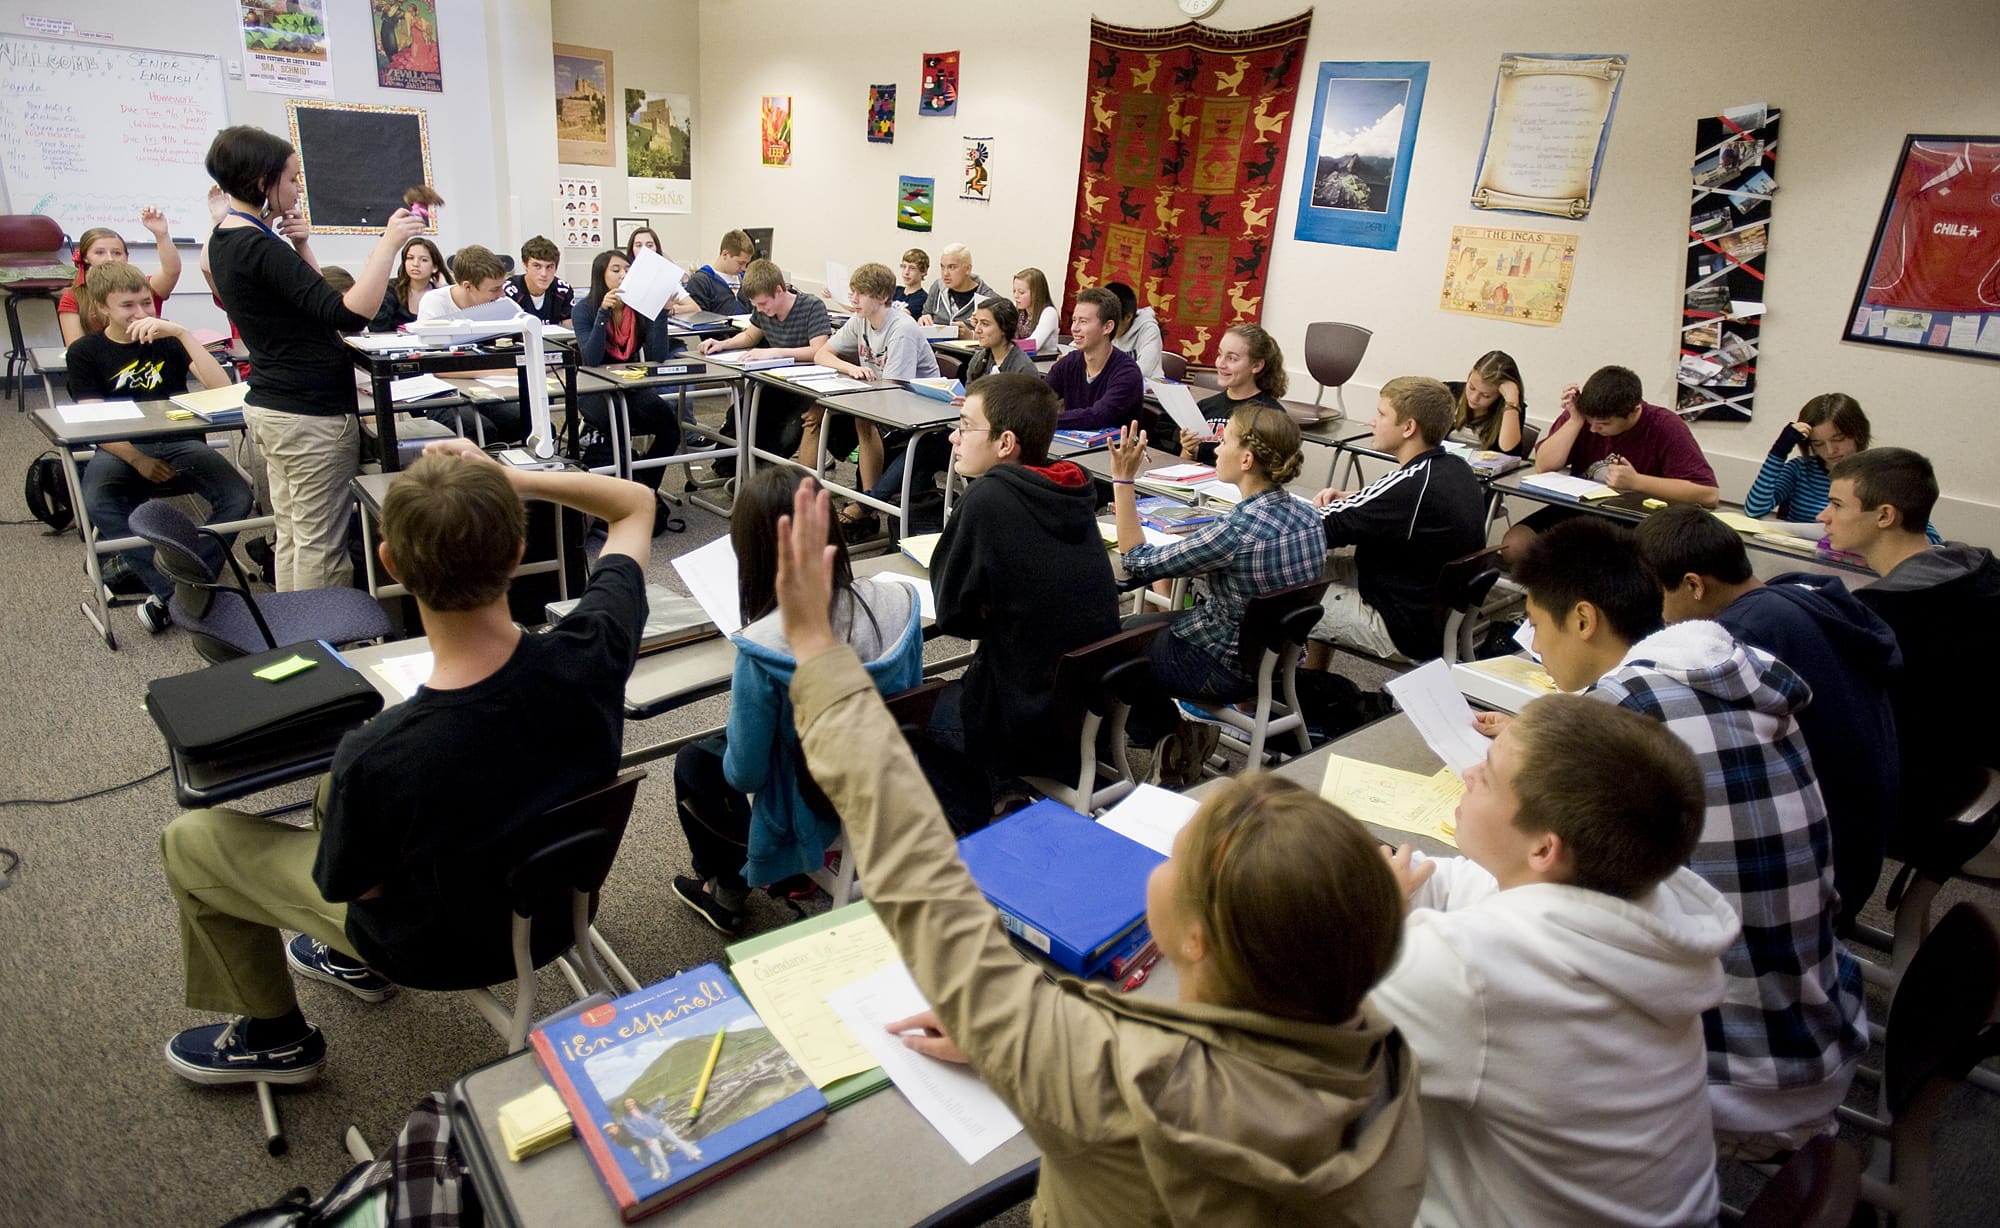 The Camas School District plans to cut around 20 teaching positions through attrition, eliminate six central office positions and 10 to 15 classified staff positions to make up for a budget shortfall in the 2019-2020 school year.